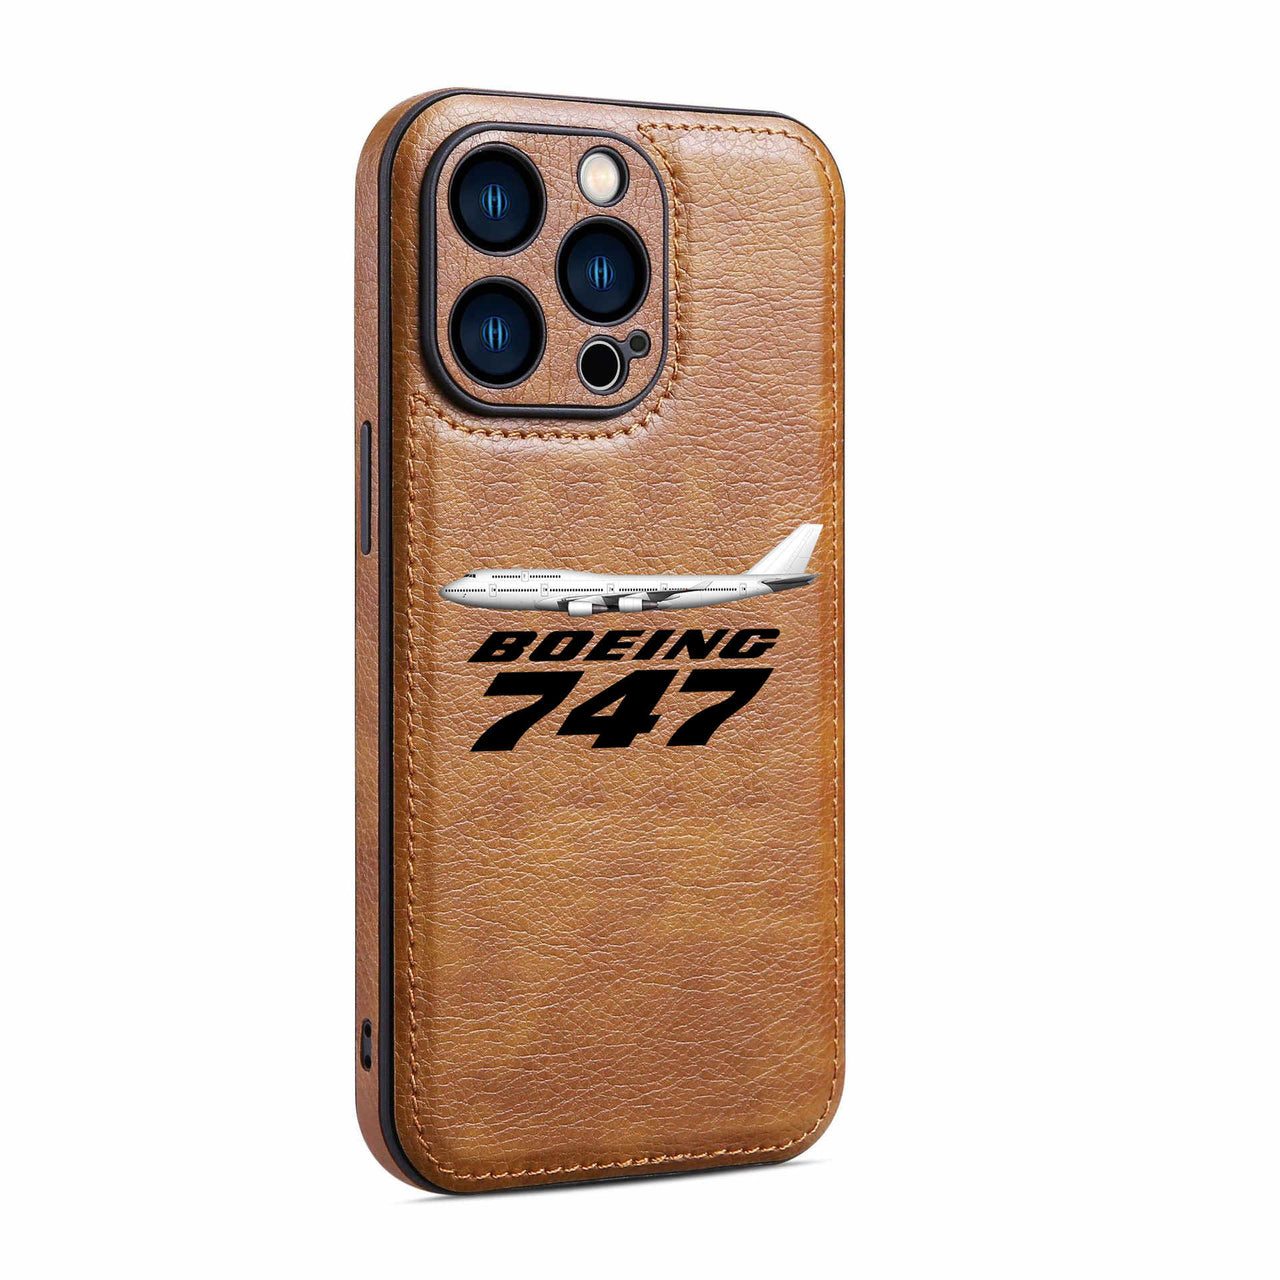 The Boeing 747 Designed Leather iPhone Cases